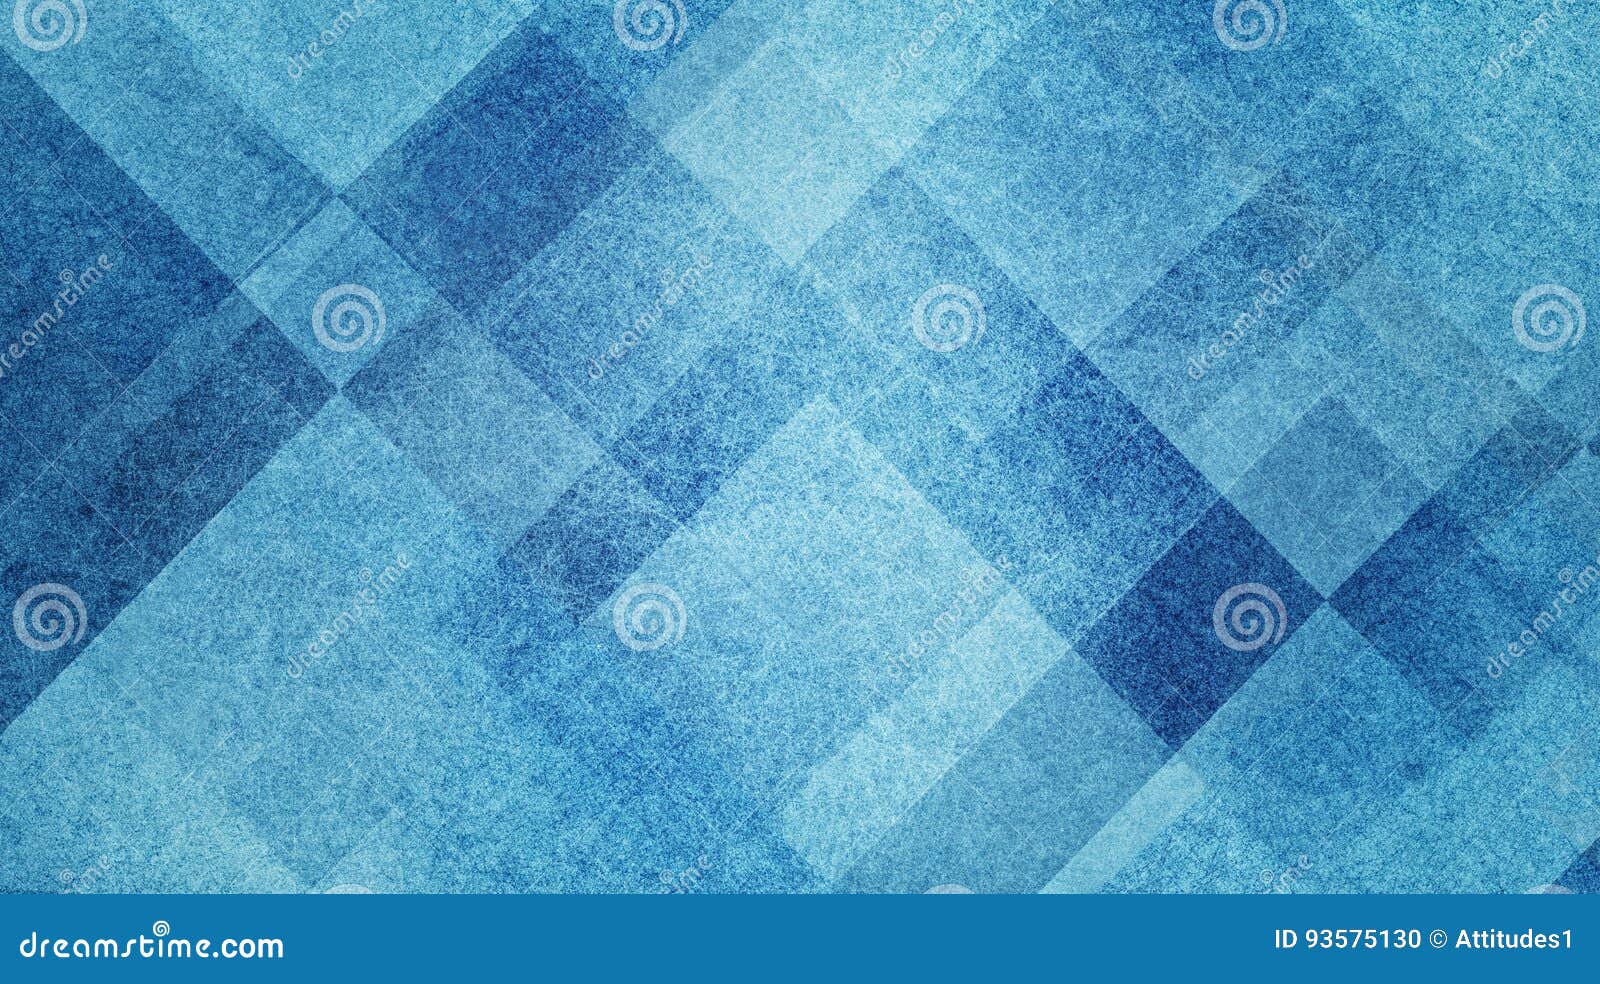 geometric abstract blue and white background pattern  with diamond and block squares layered with texture